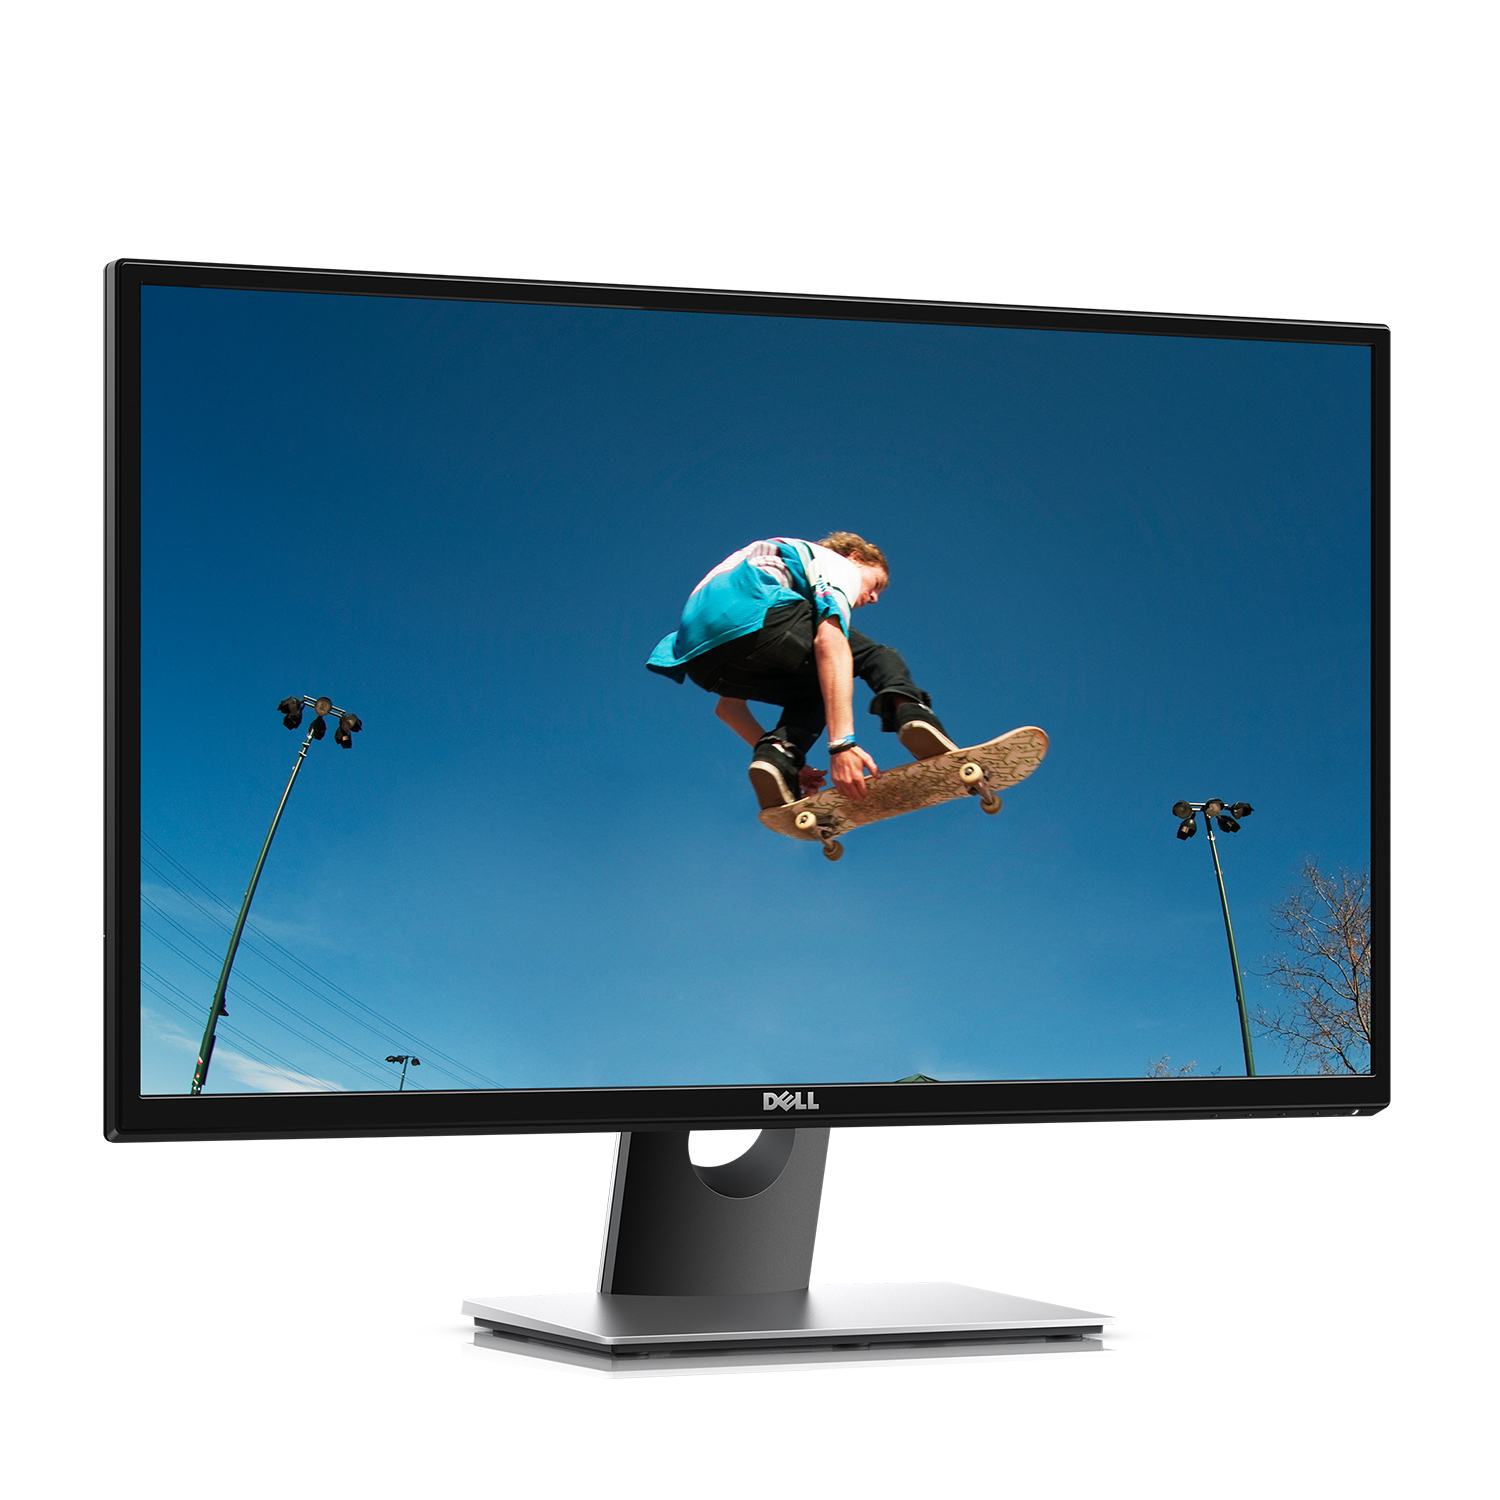 Dell SE2717HR 27" FHD LED Monitor - 1920 x 1080 Full HD Display - 75Hz Refresh Rate (HDMI) - AMD FreeSync Technology - 6ms Response Time - In-plane Switching Technology - image 2 of 7